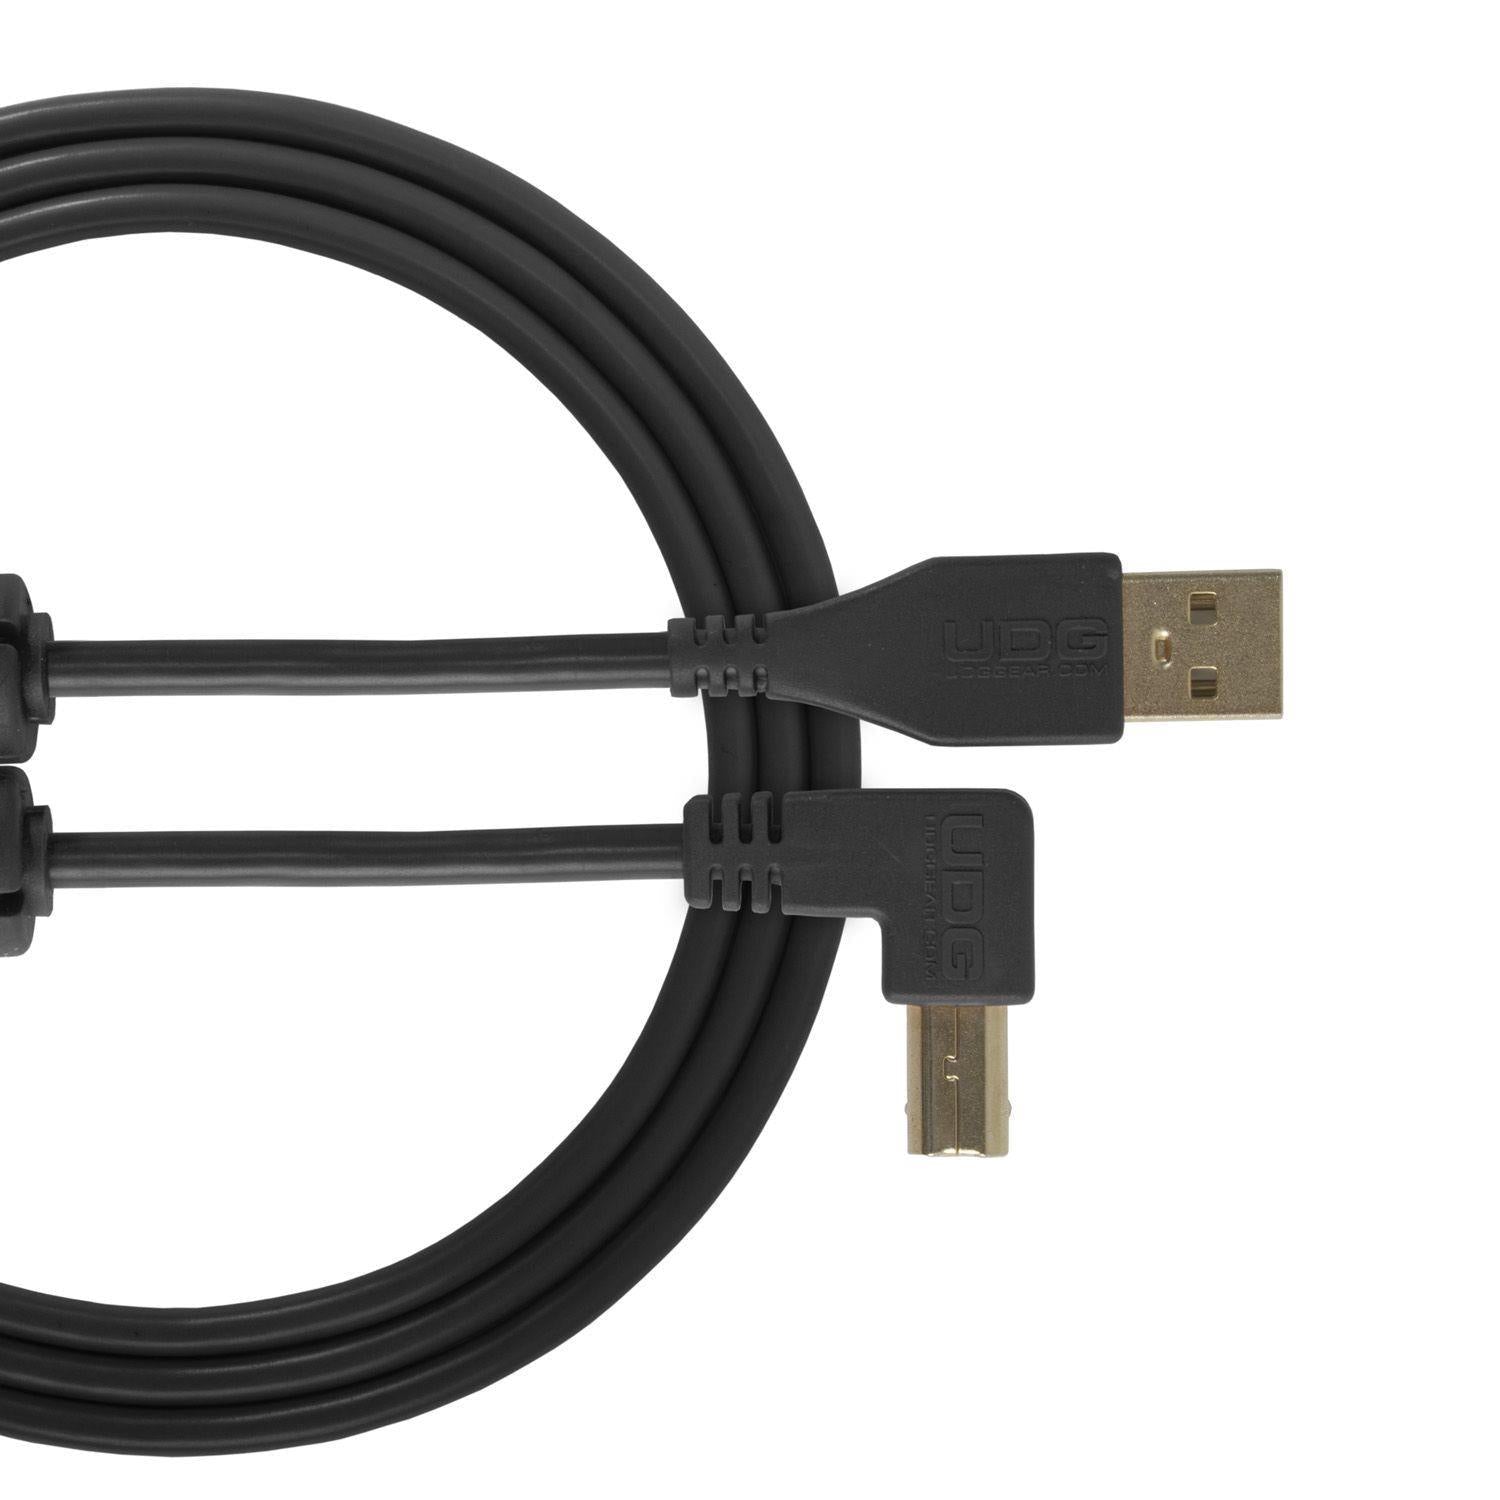 UDG Ultimate Audio Cable USB 2.0 A-B Black Angled 1m - DY Pro Audio